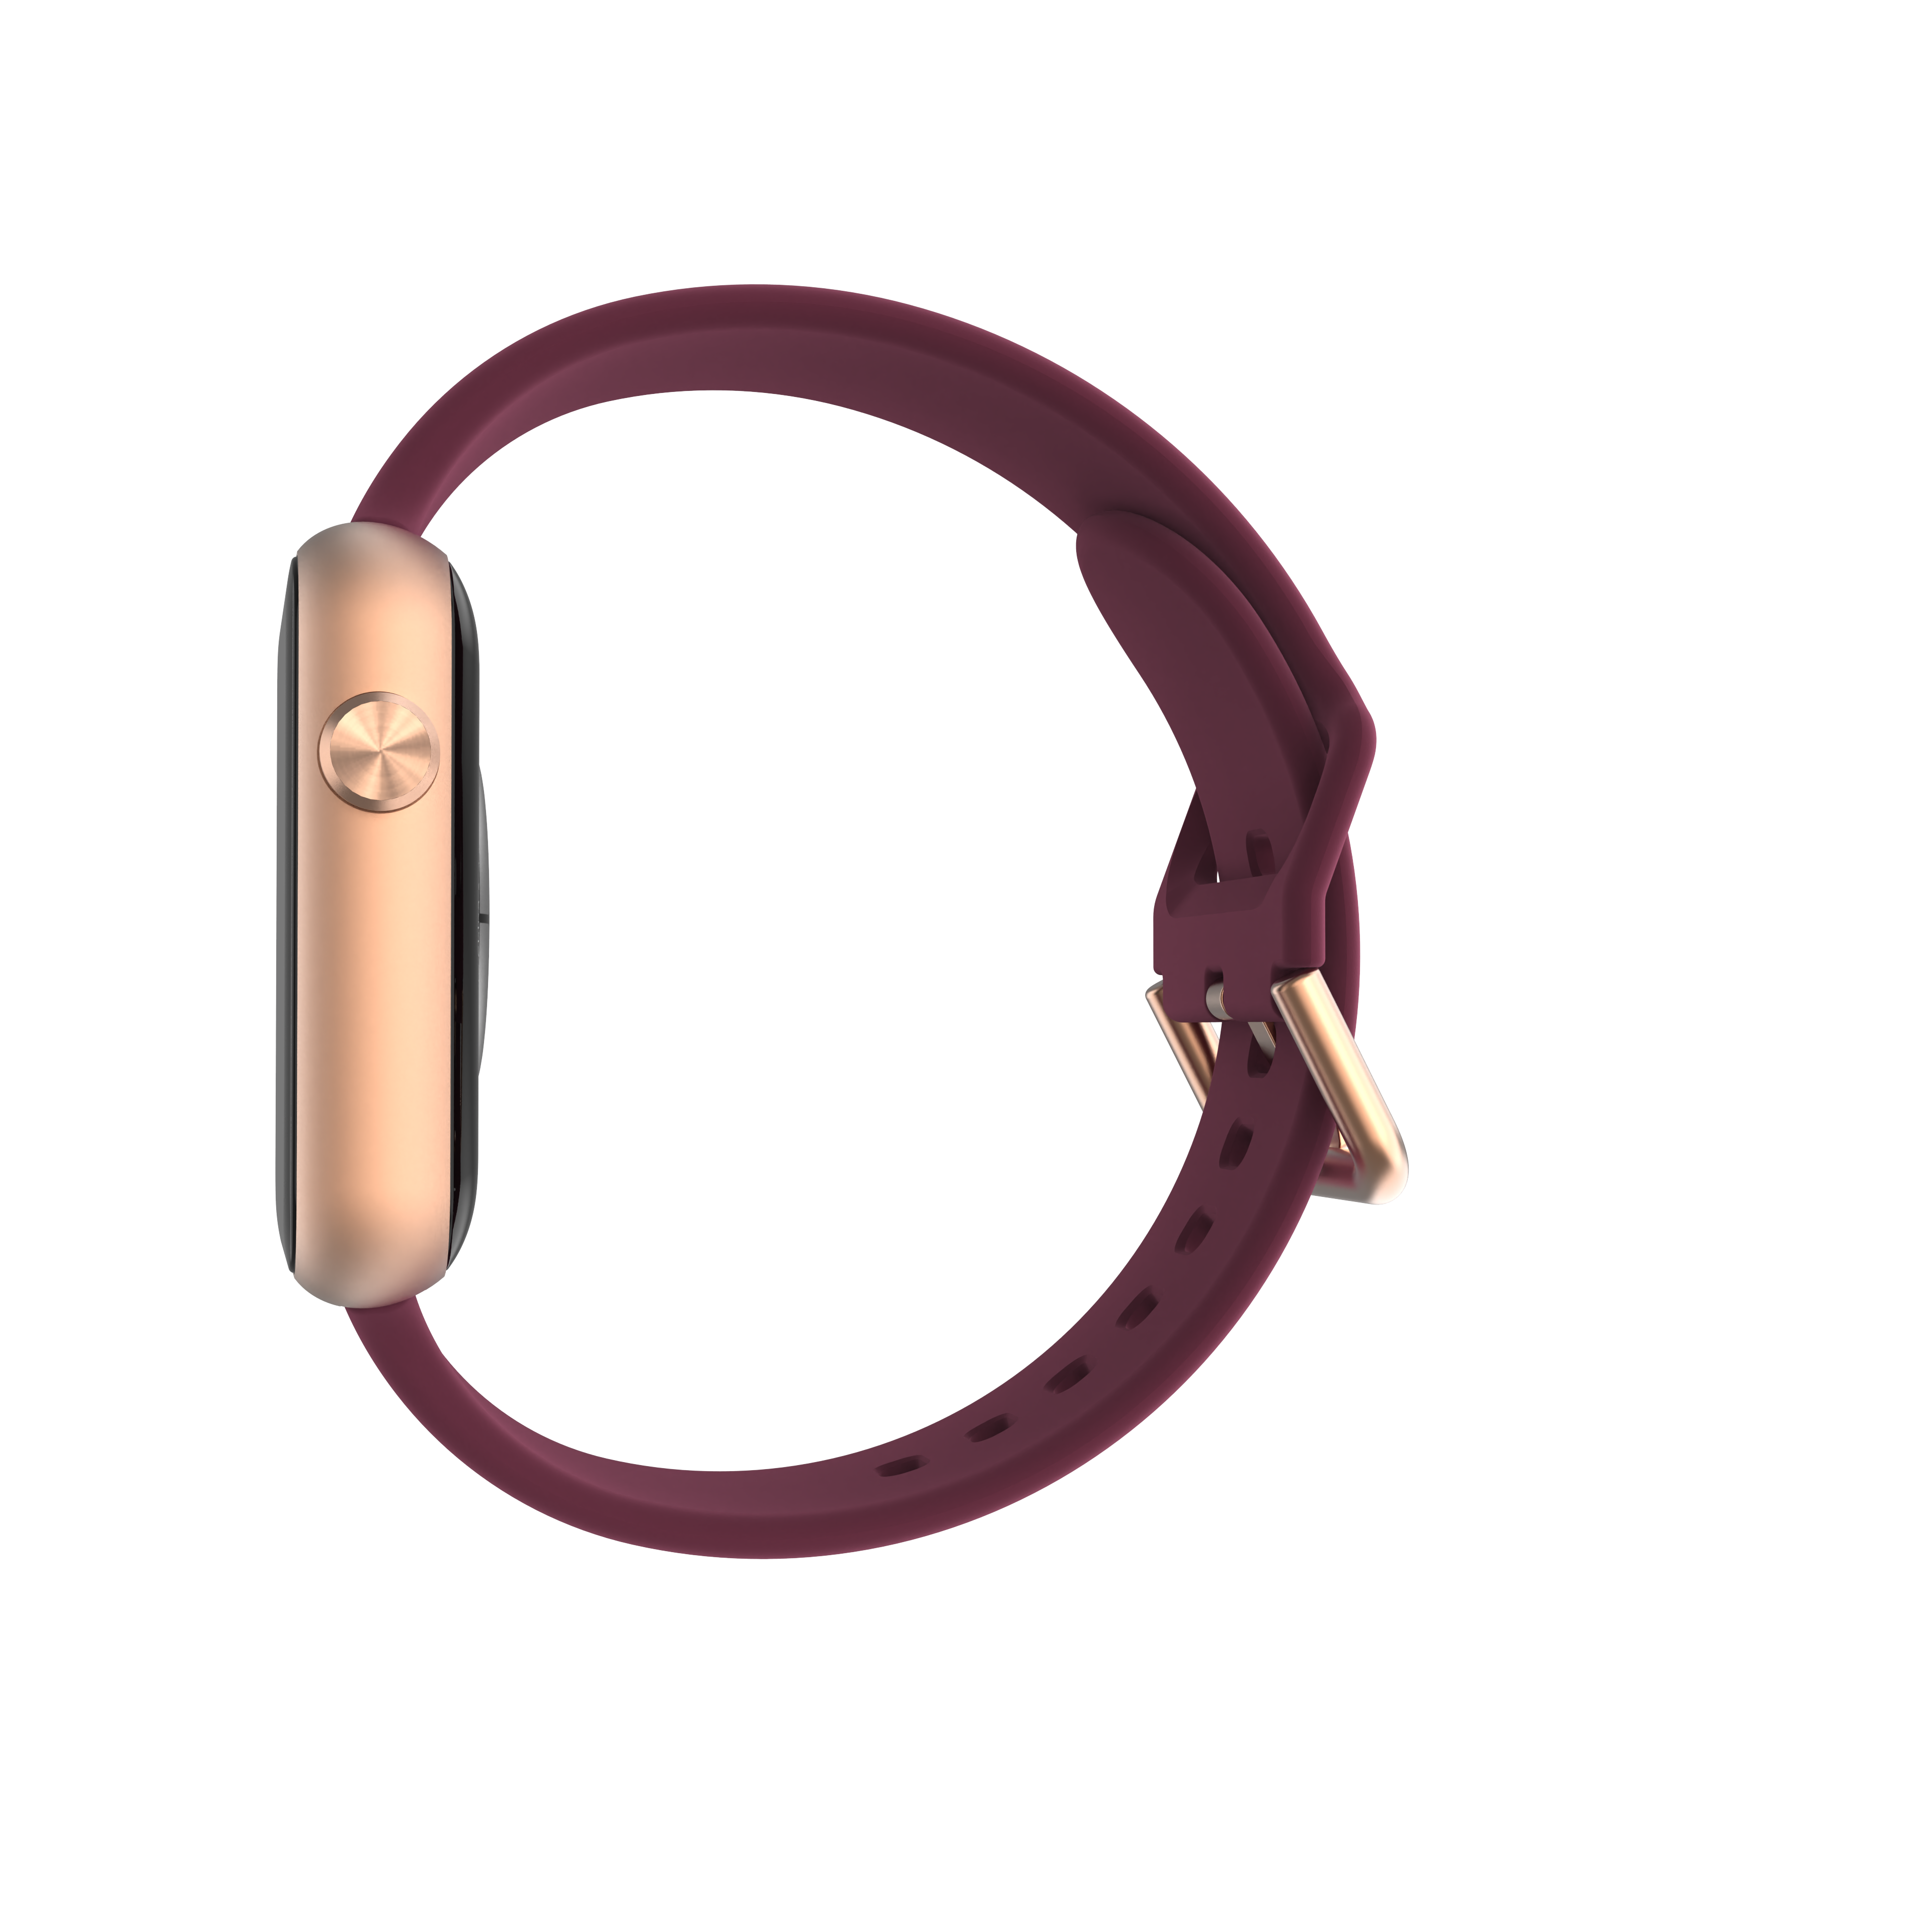 iTouch Air 4 | Jillian Michaels Edition Smartwatch in Rose Gold with Merlot Strap